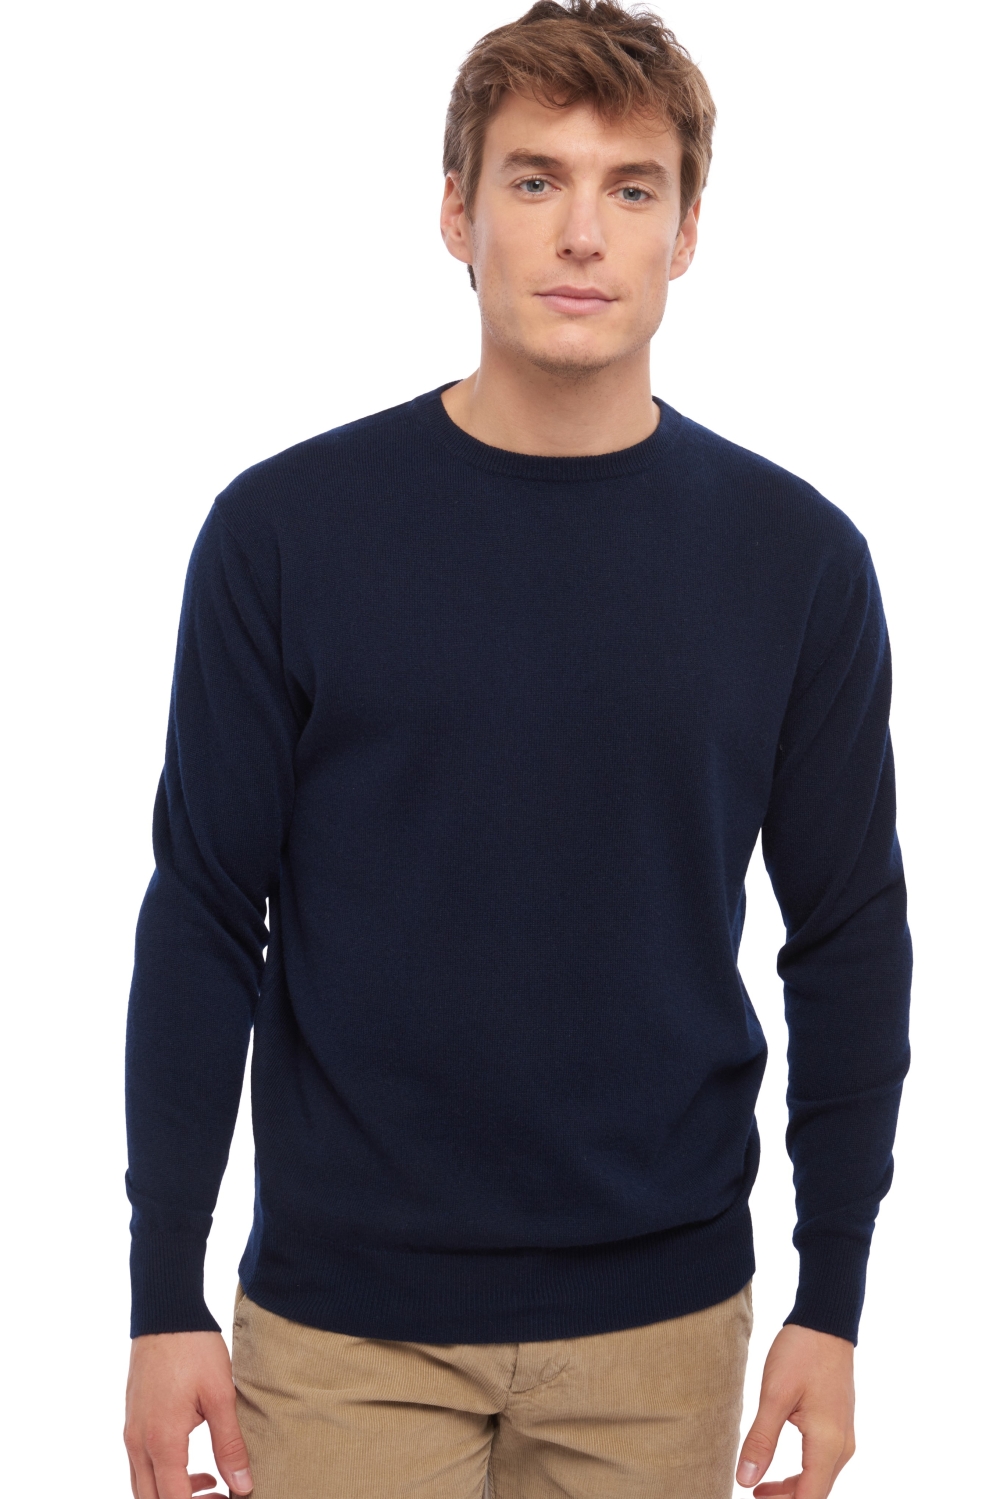 Cachemire pull homme col rond nestor marine fonce xs